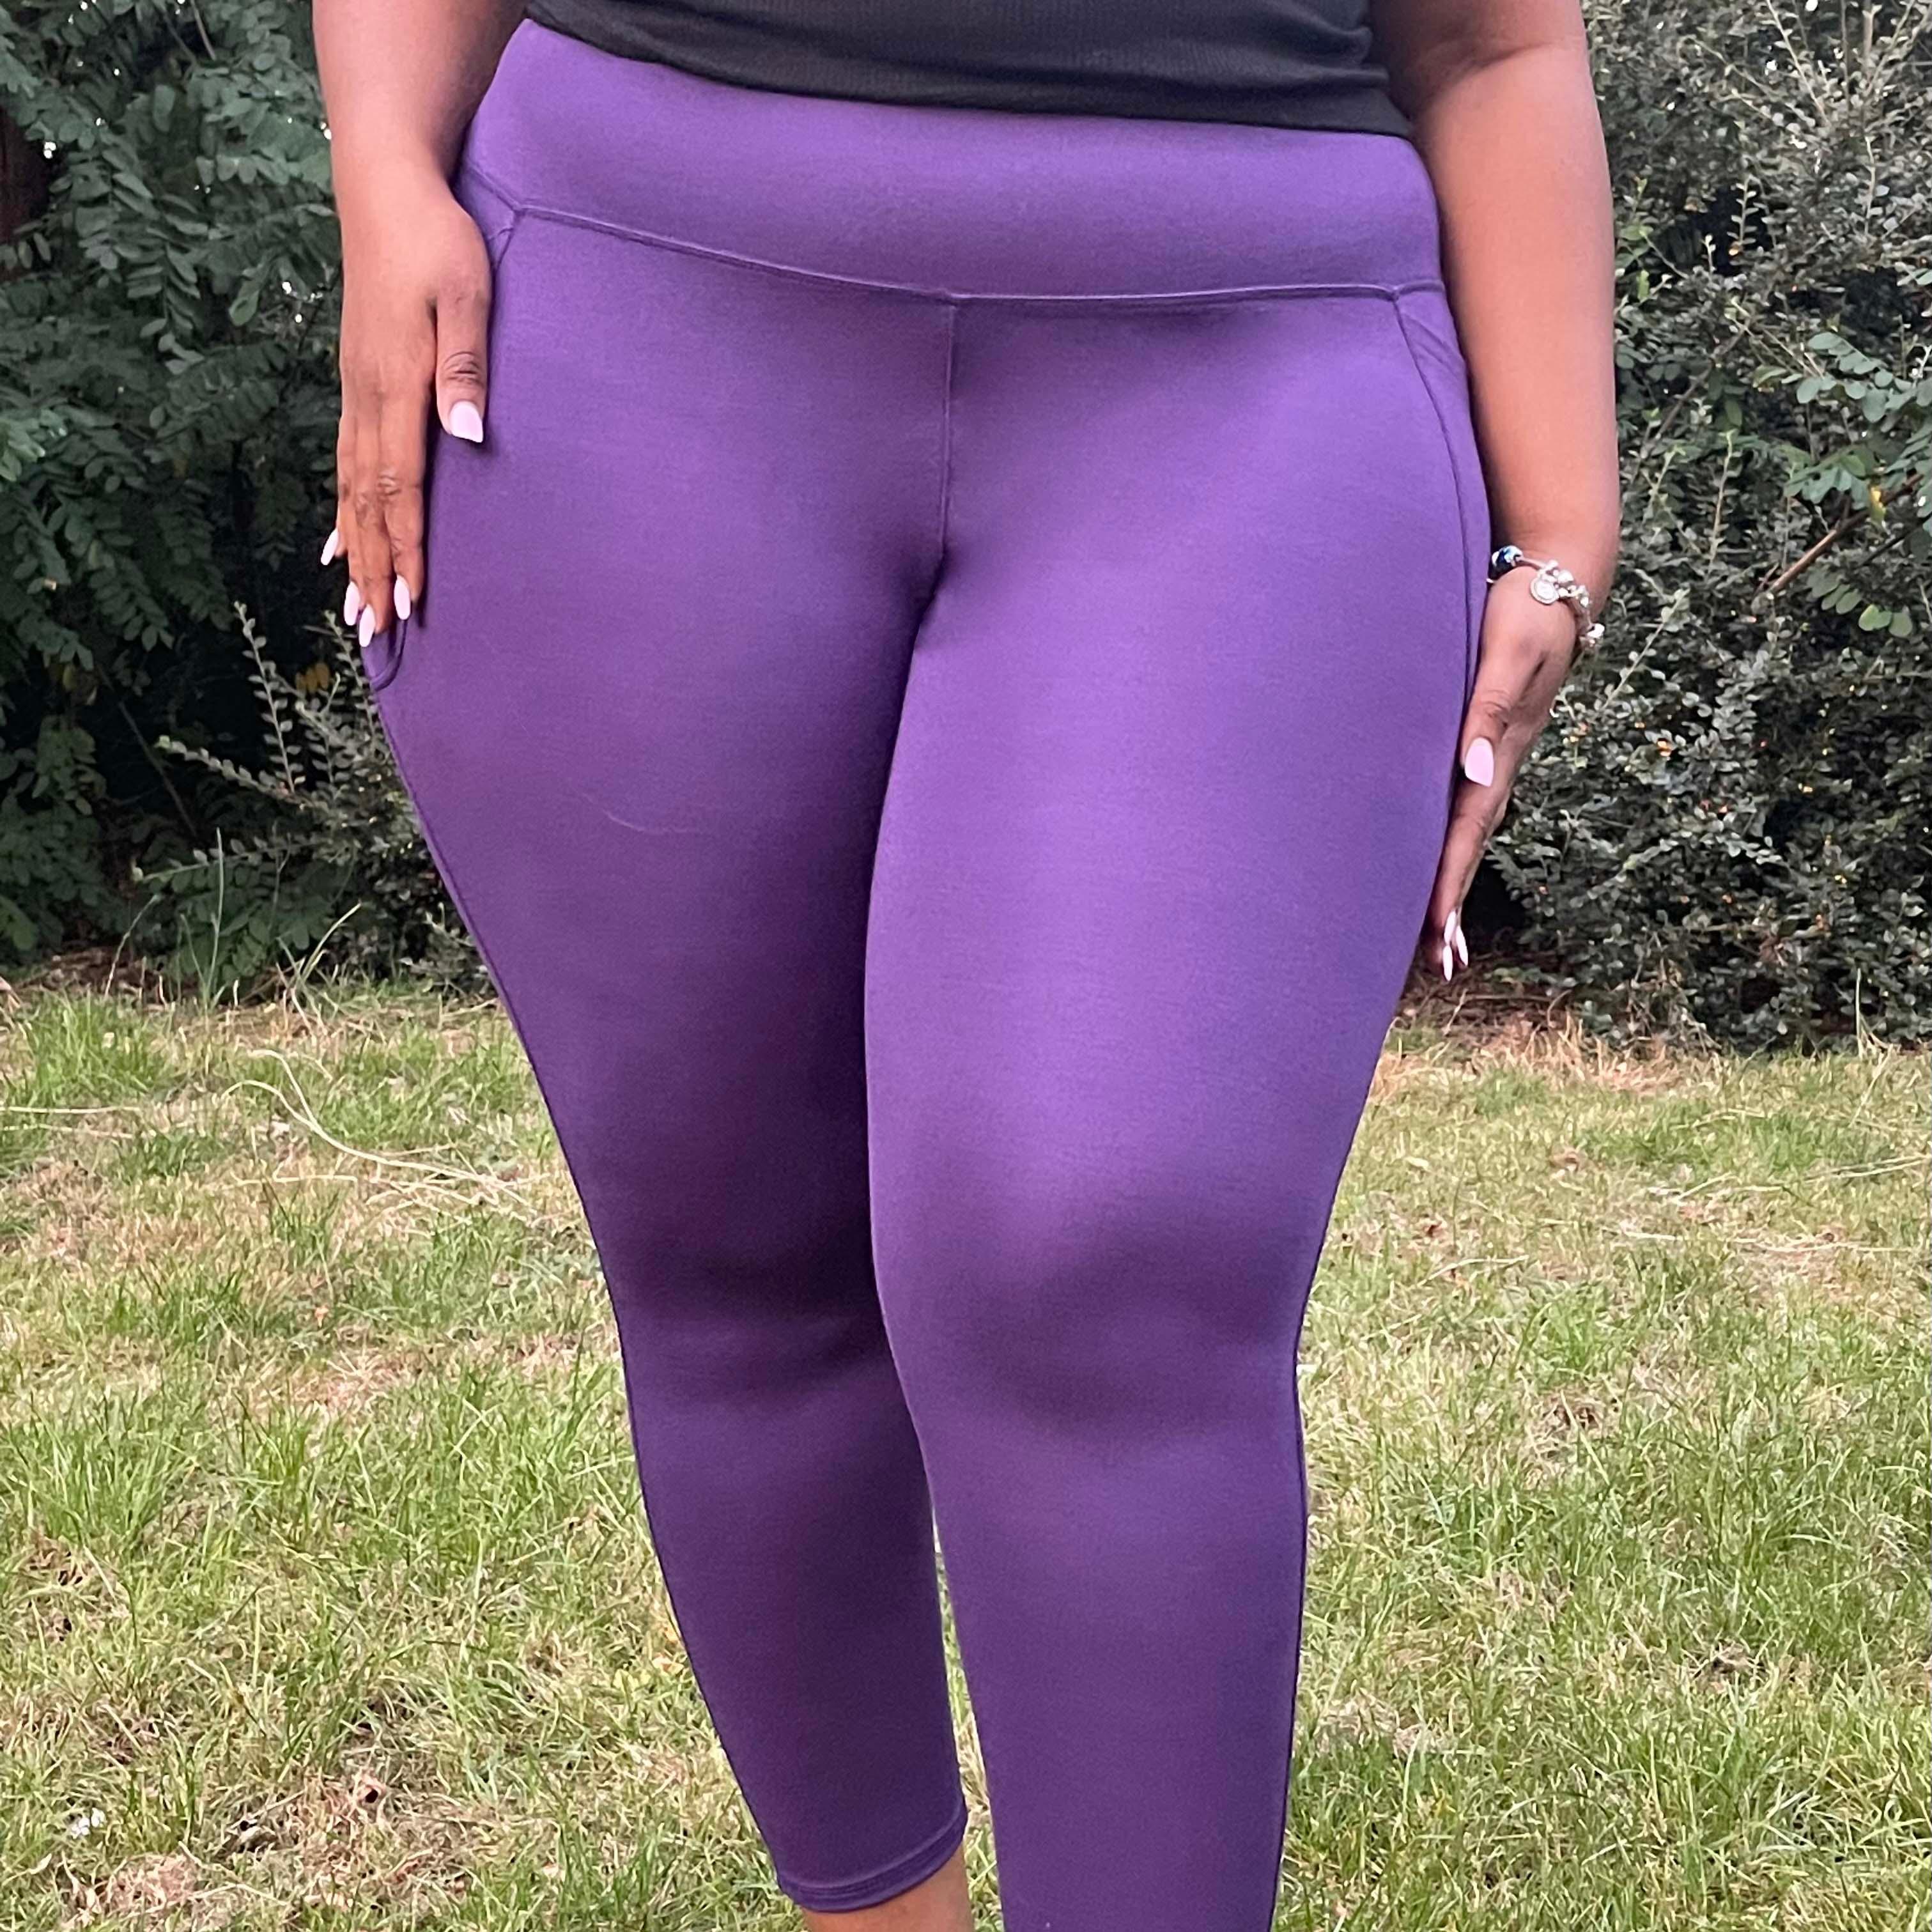 Woman Within Woman's Within Leggings, size Medium, 12/14.,purple